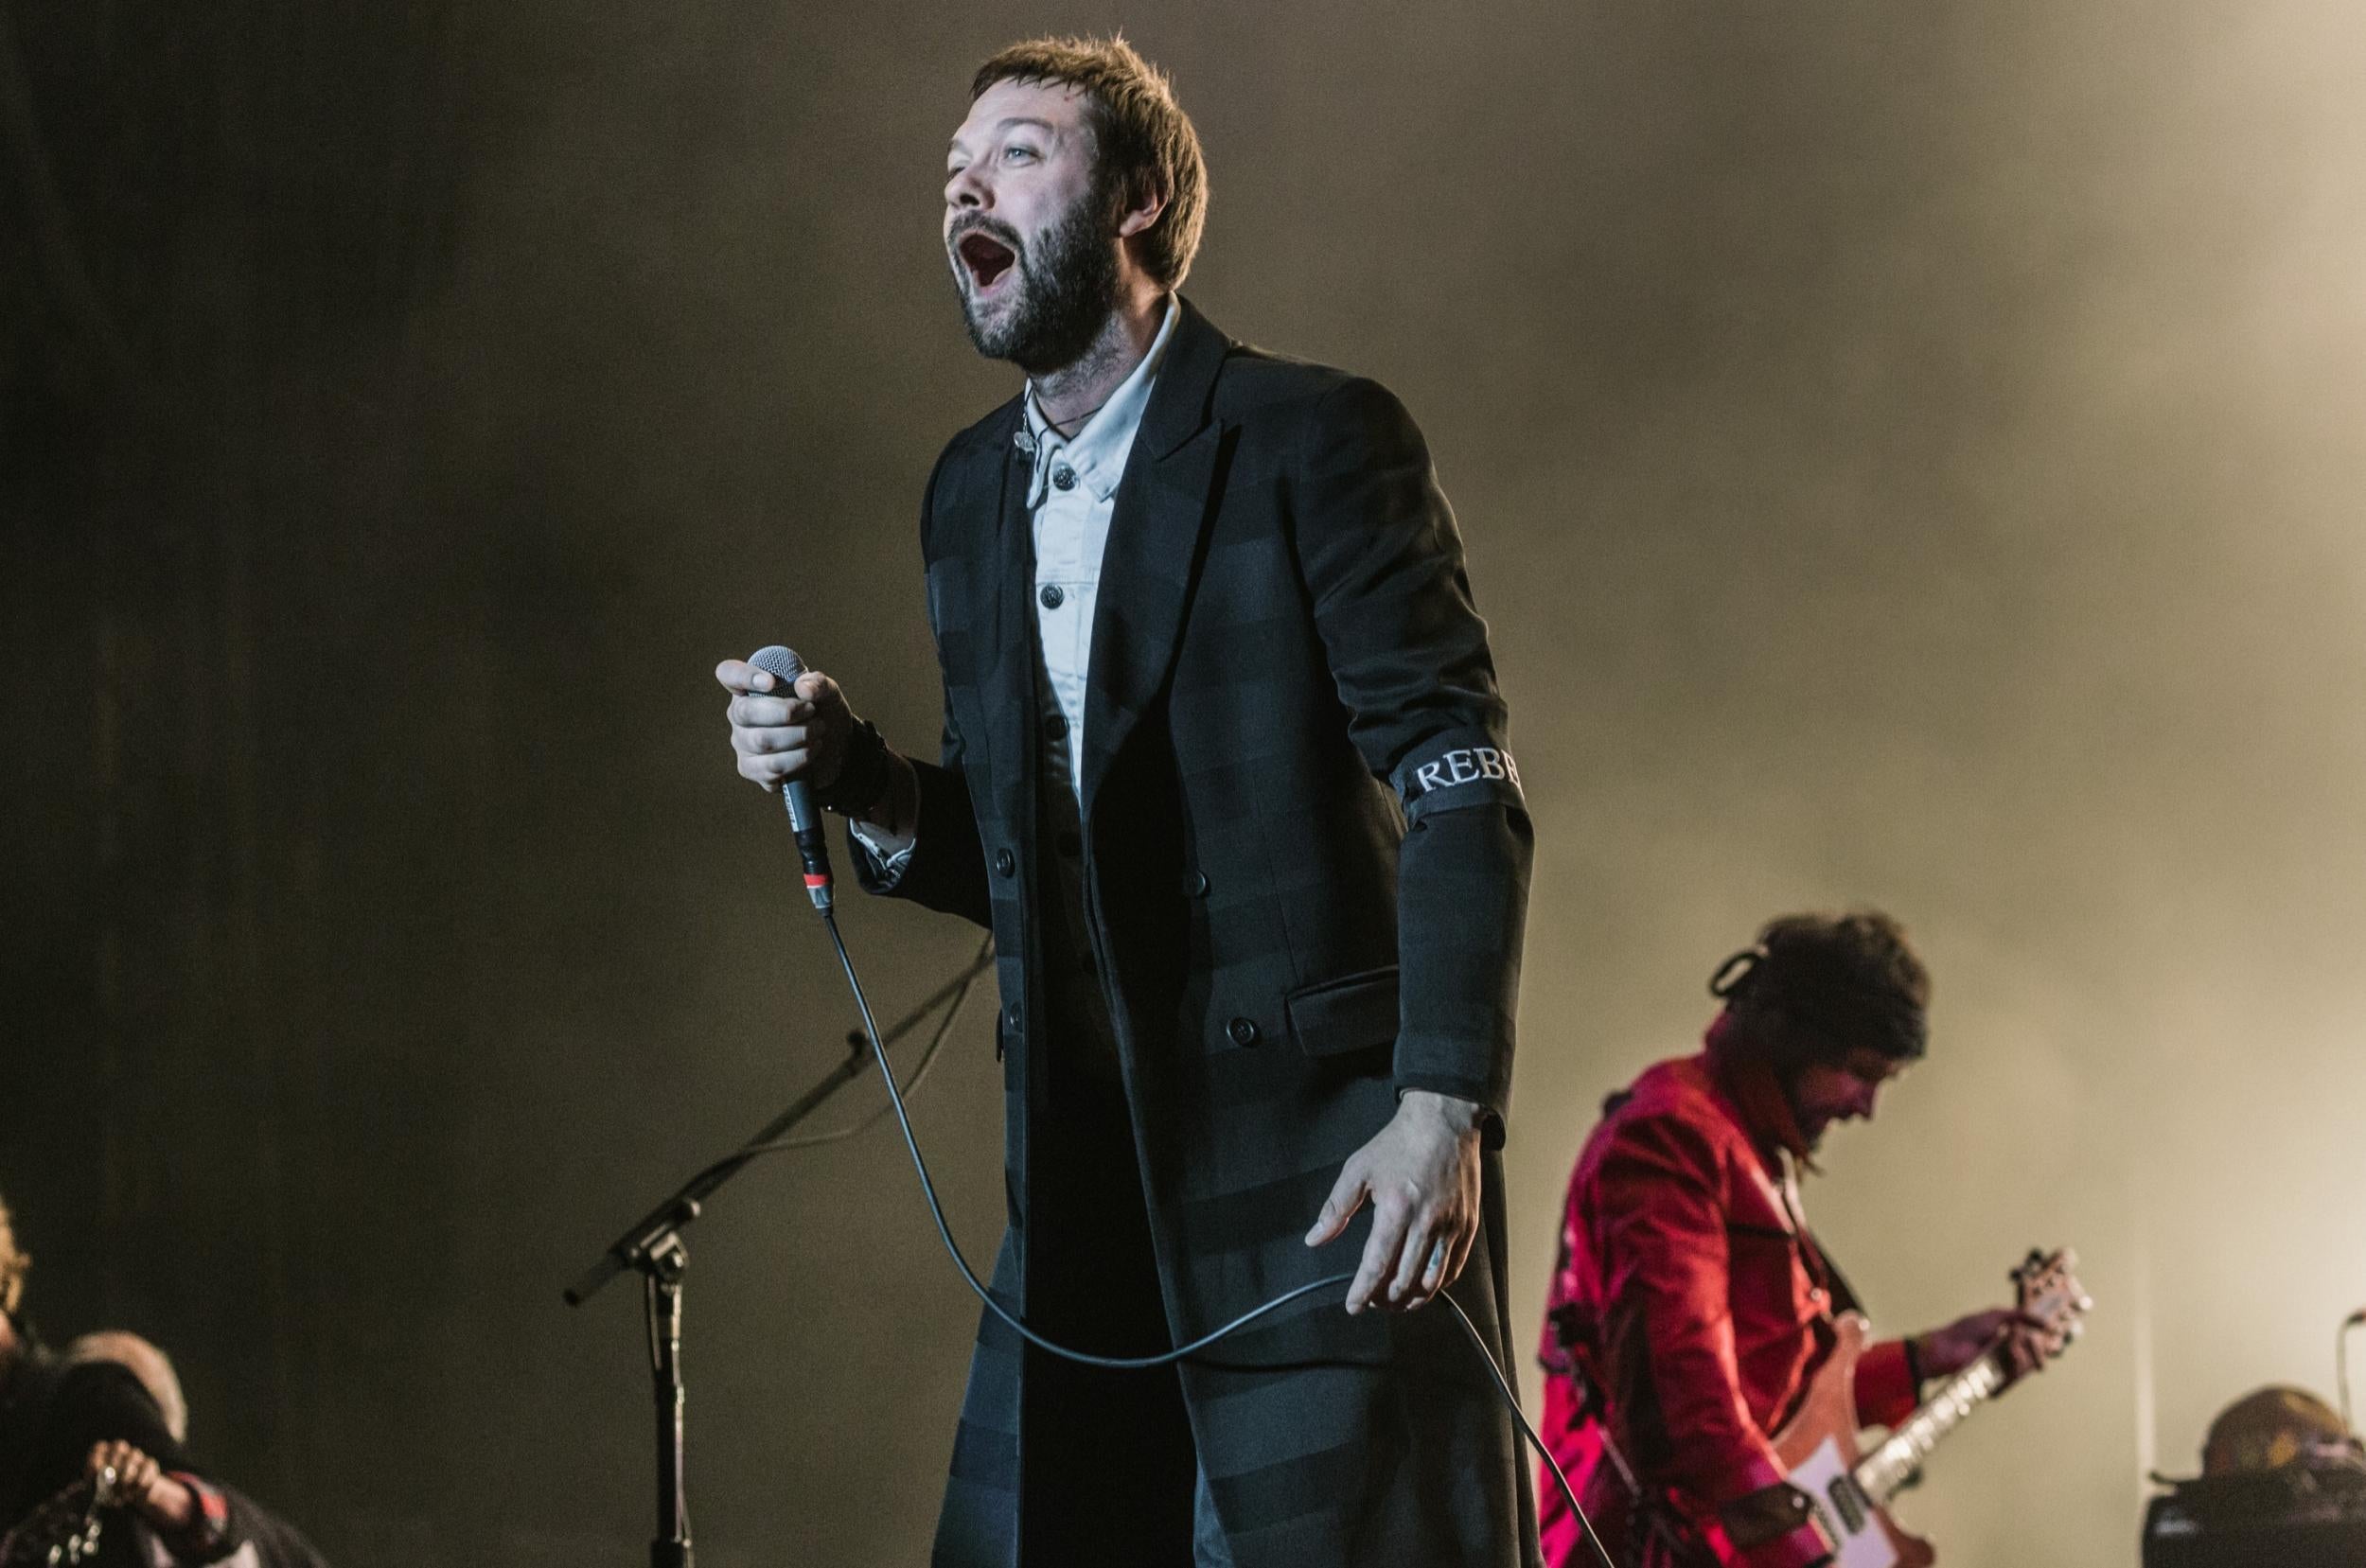 Tom Meighan from Kasabian performs at Reading Festival 2017